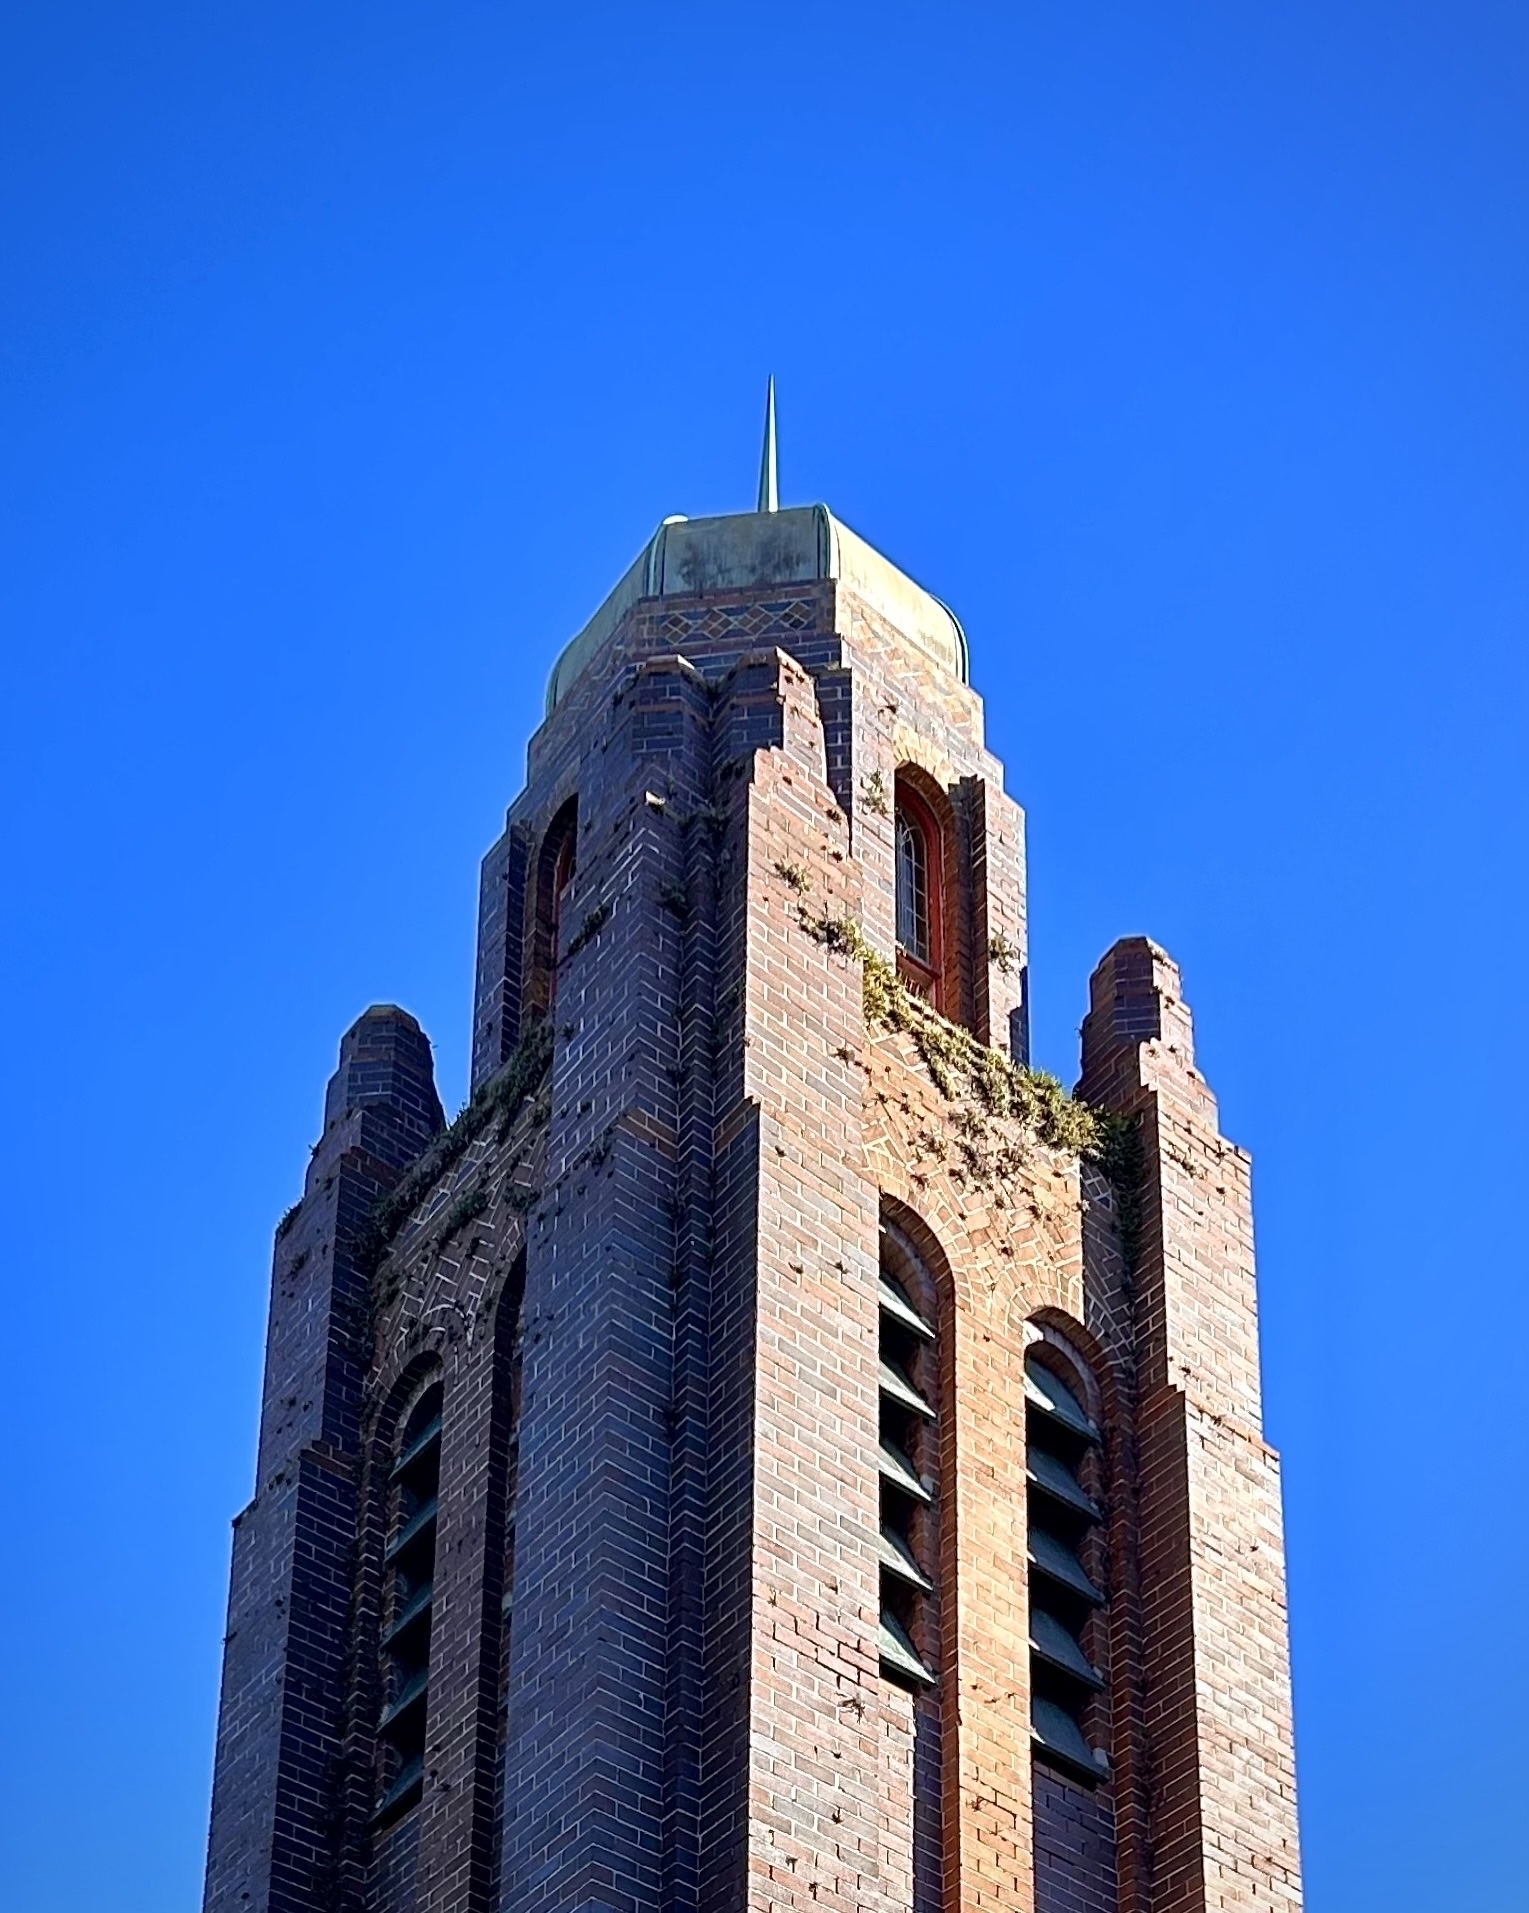 A deco-like brick spire on top of a church, with blue sky in the background.  